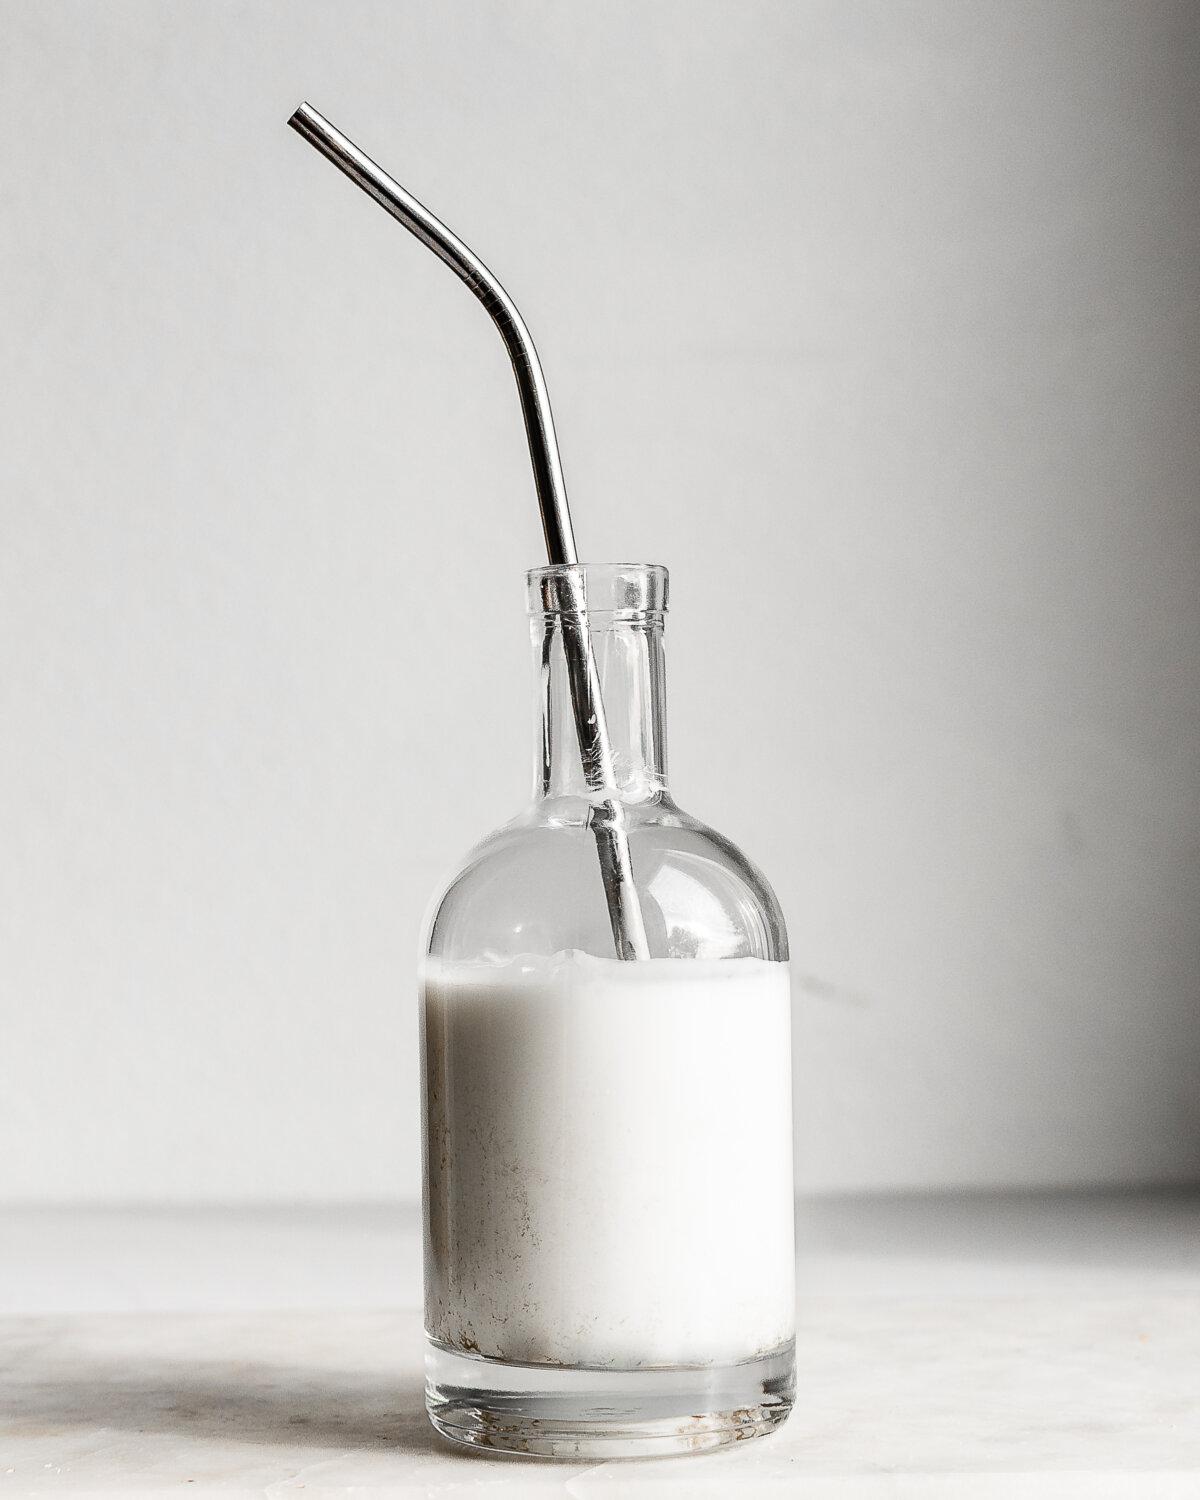 Kefir is slightly thicker than milk and was traditionally considered an elixir of long life. (Jennifer McGruther)